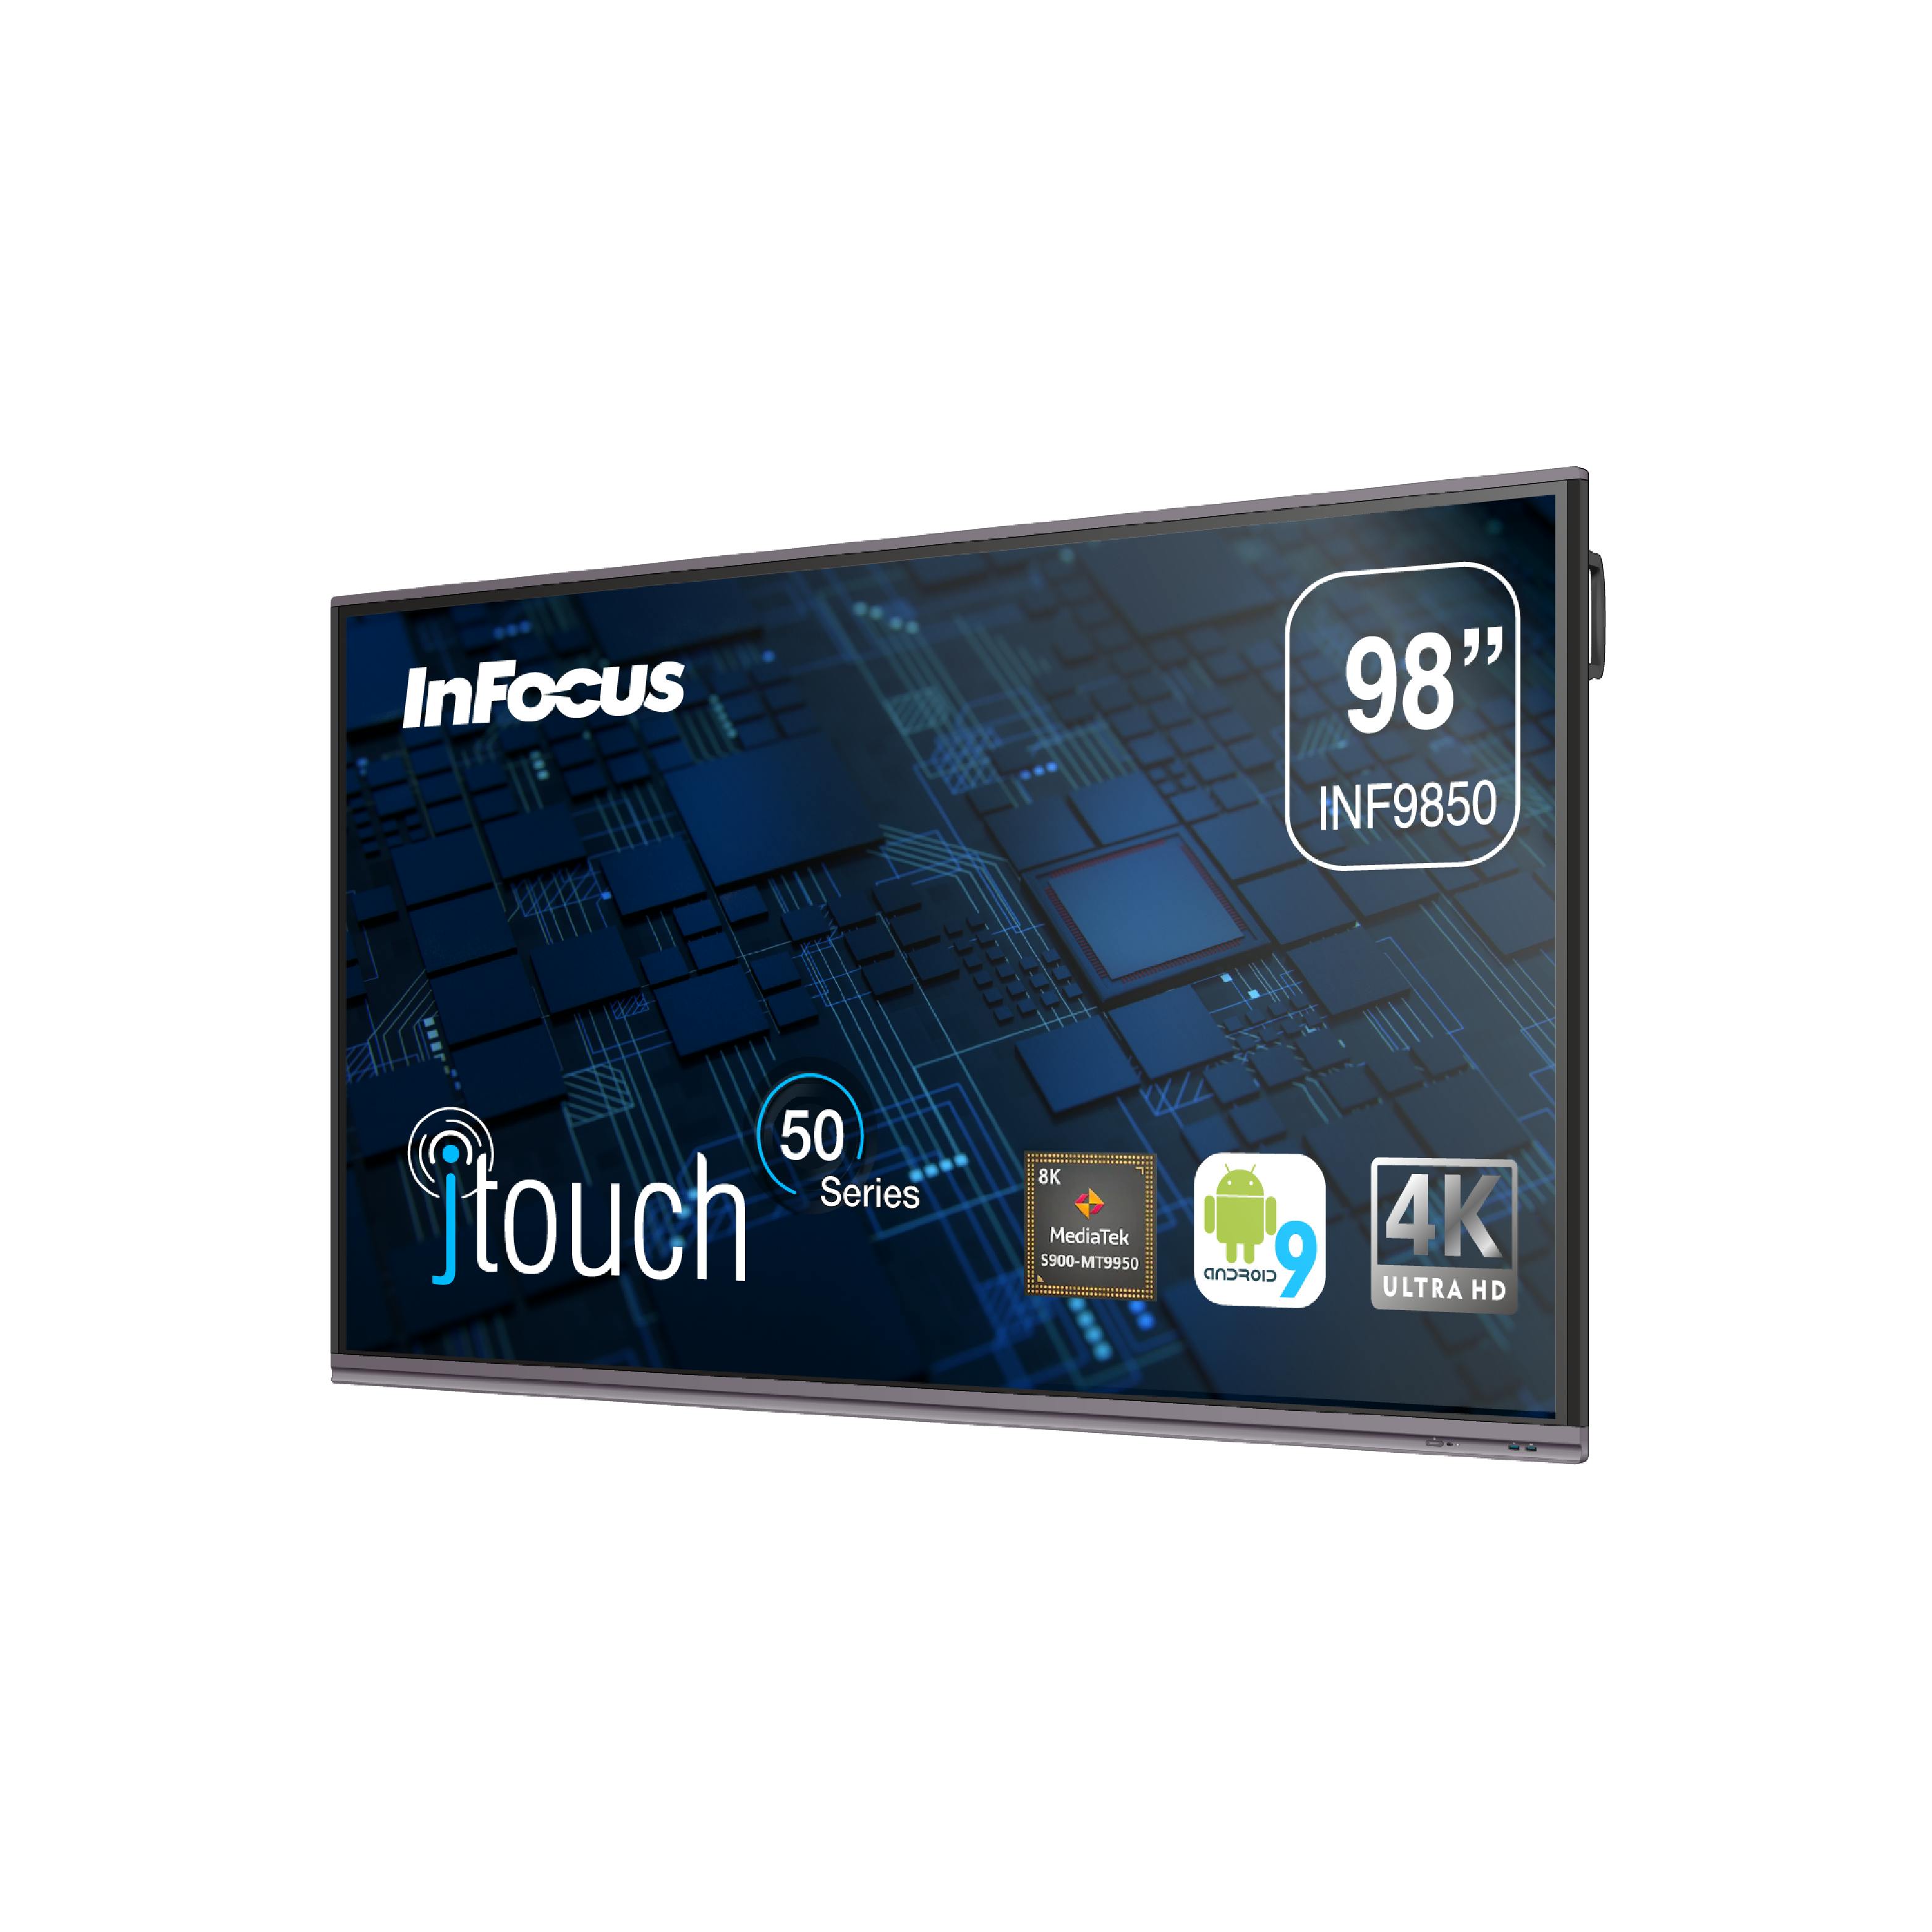 https://infocus.imgix.net/2022/04/JTouch-50-Series_INF9850_FR_90-01.png?auto=compress%2Cformat&ixlib=php-3.3.1